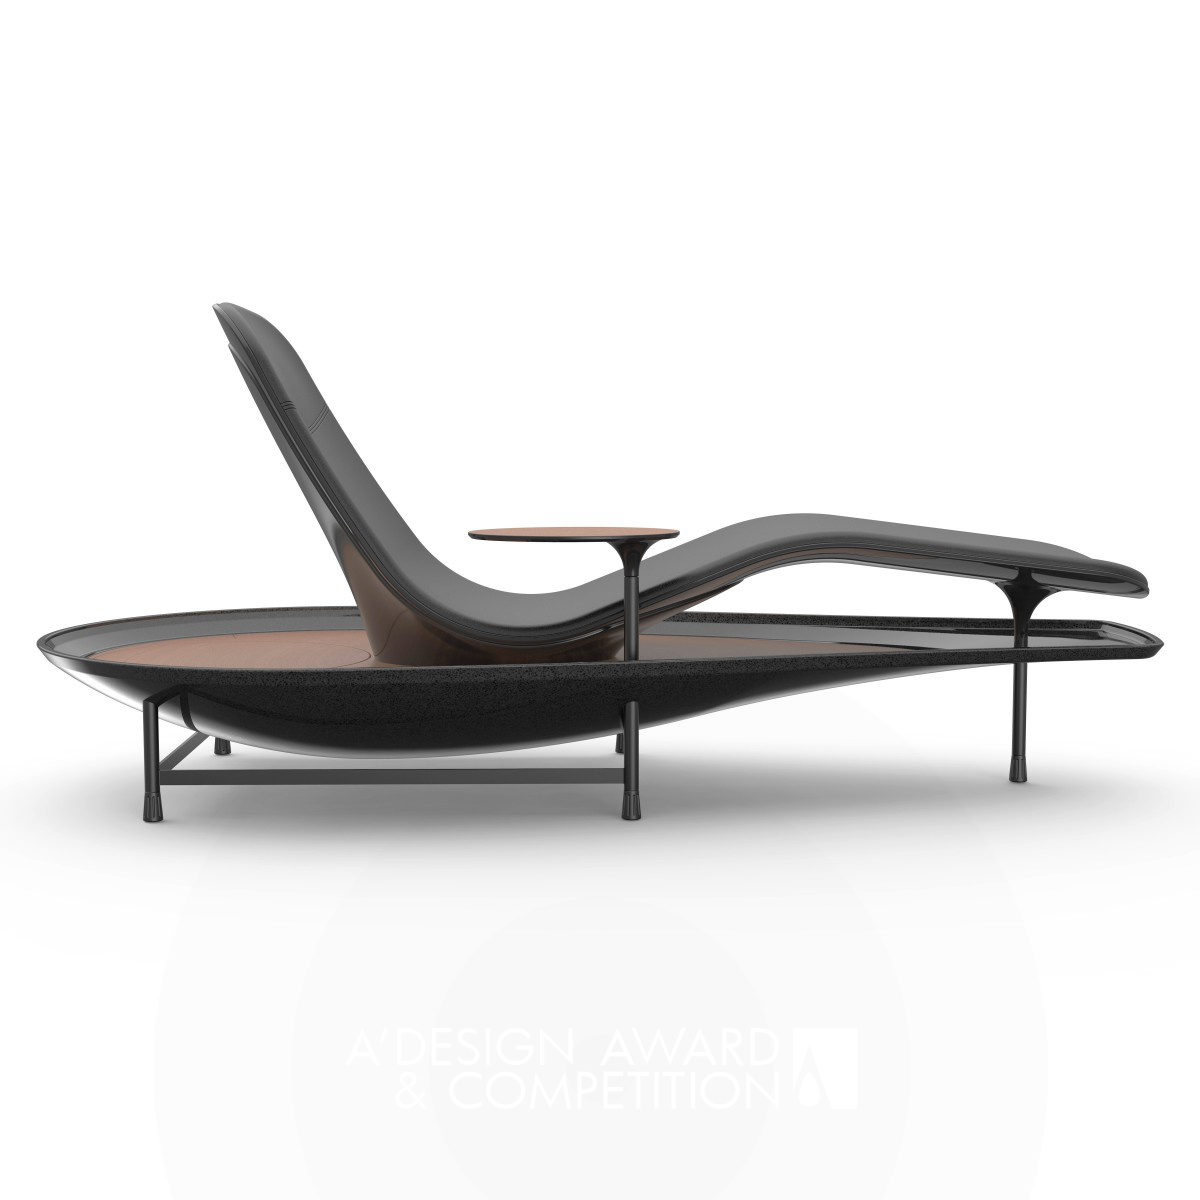 Dhyan <b>Chaise Lounge Concept